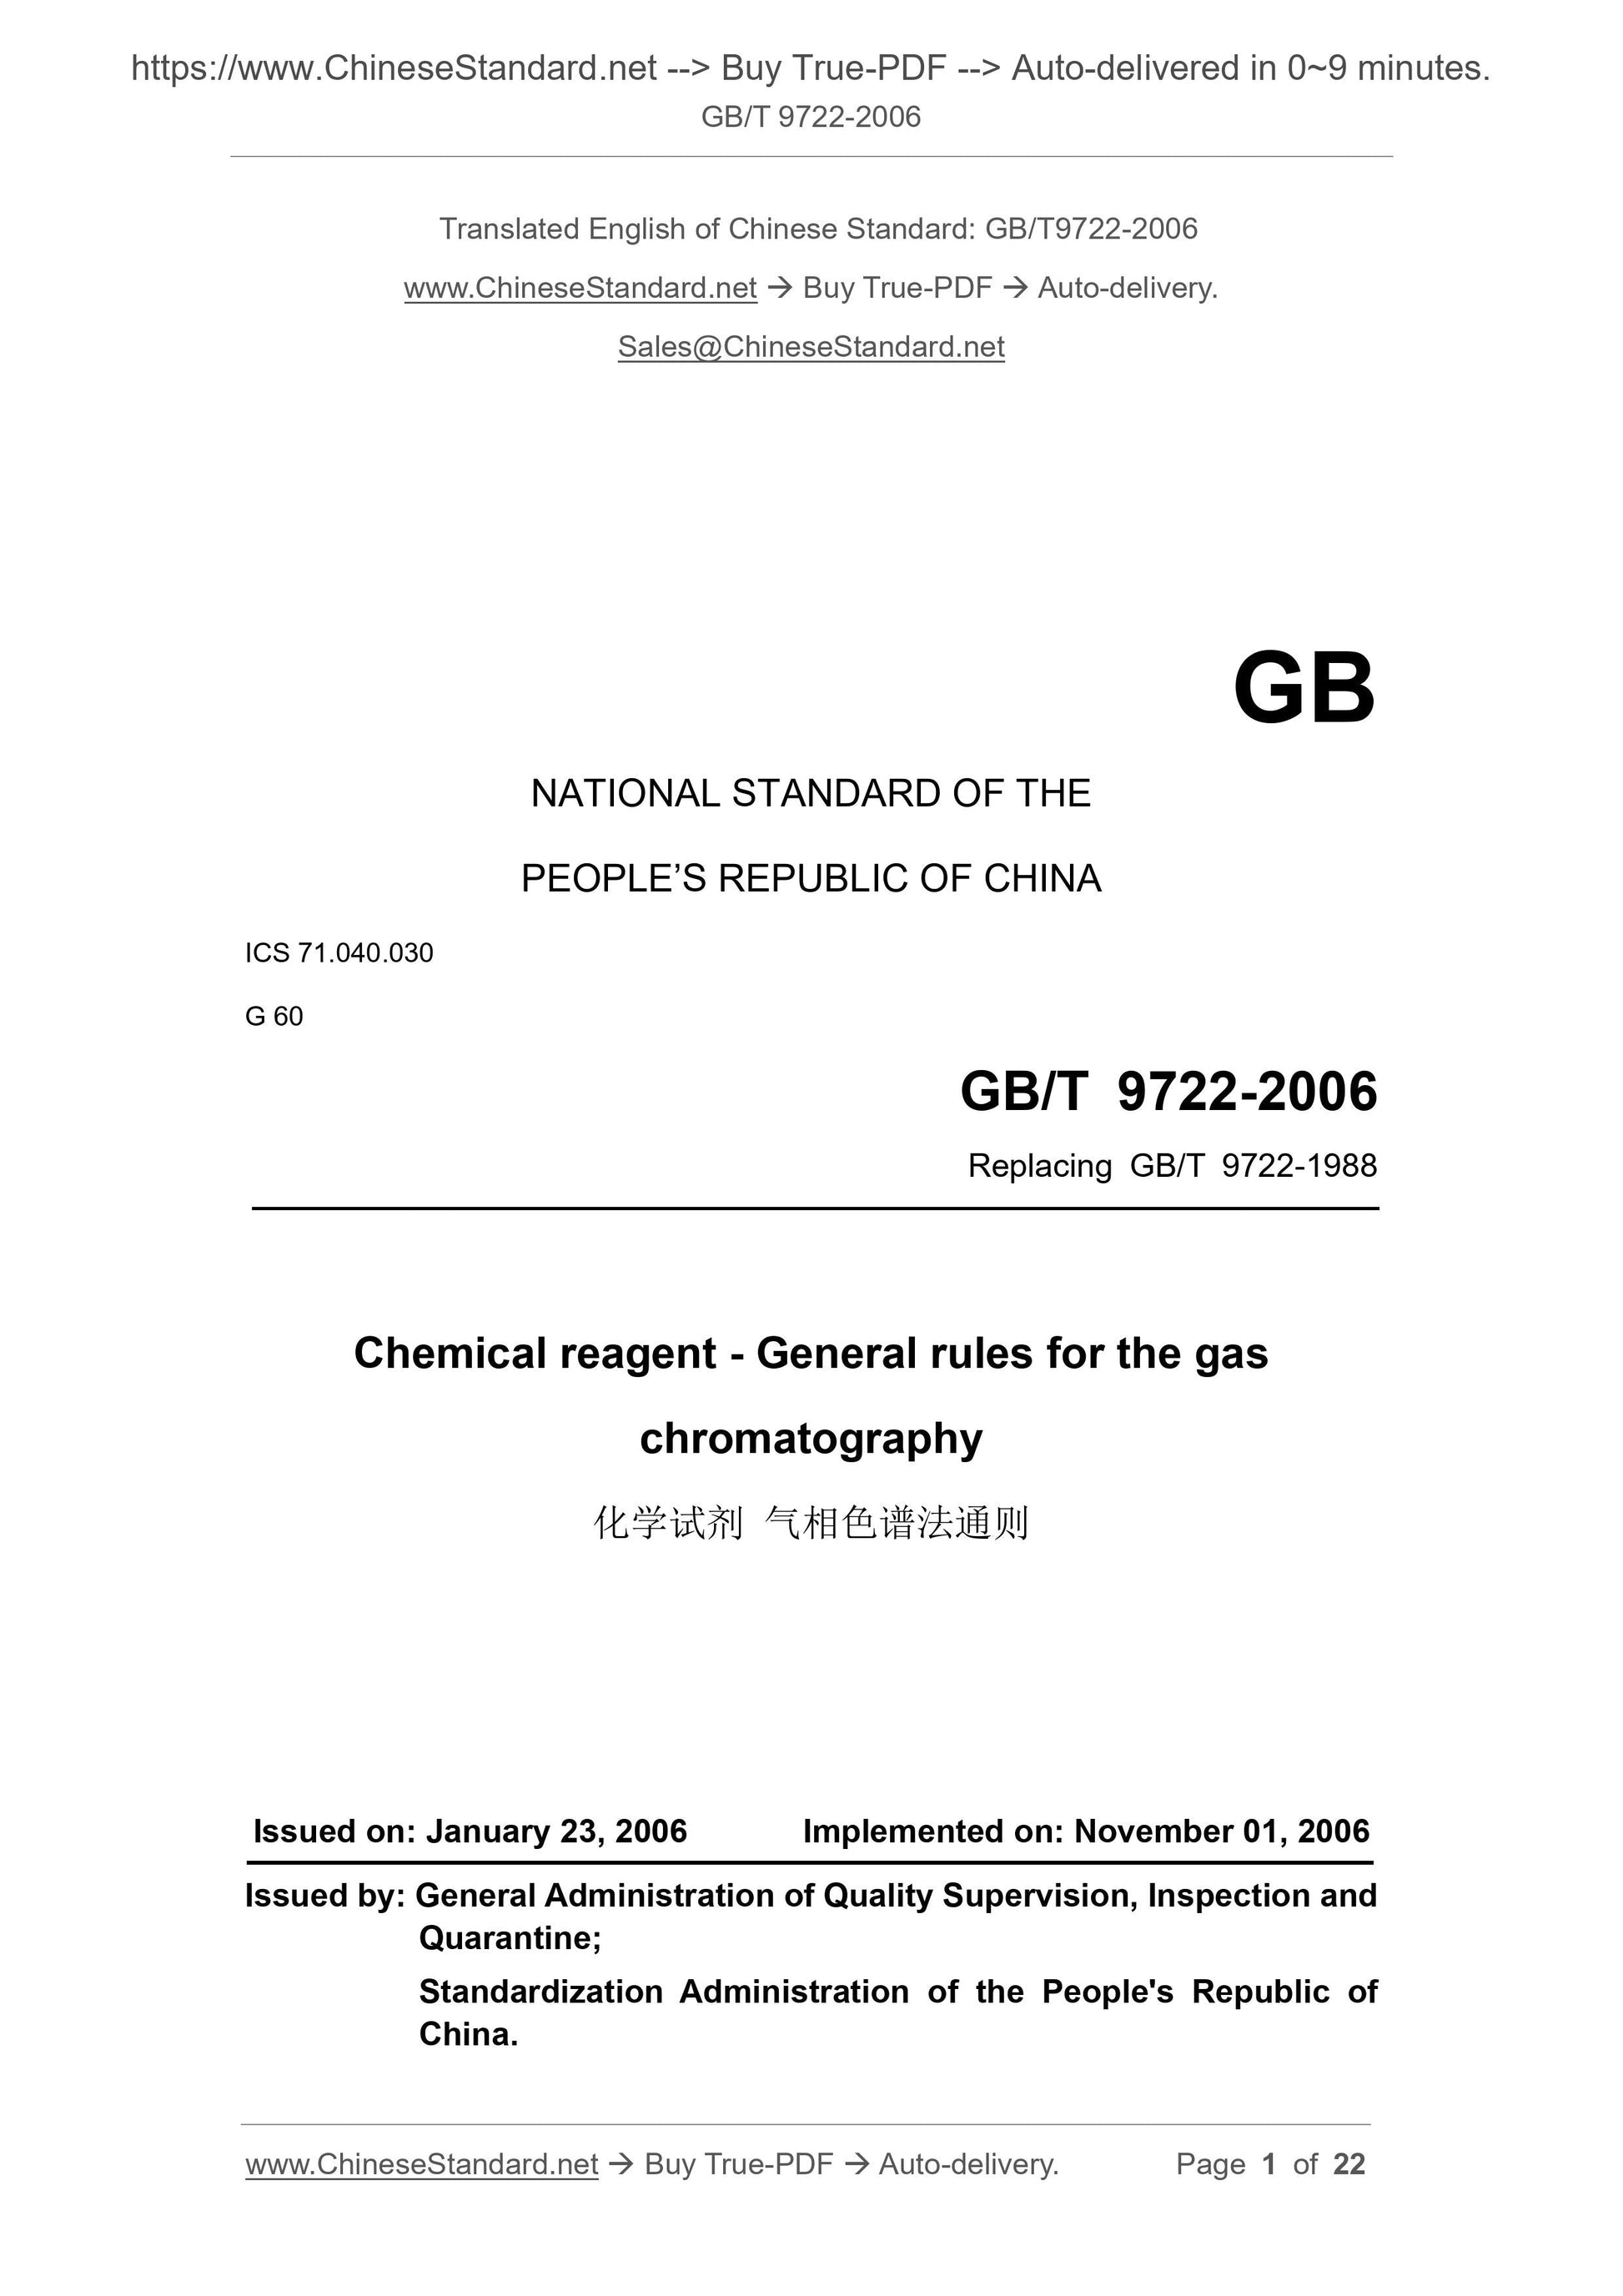 GB/T 9722-2006 Page 1